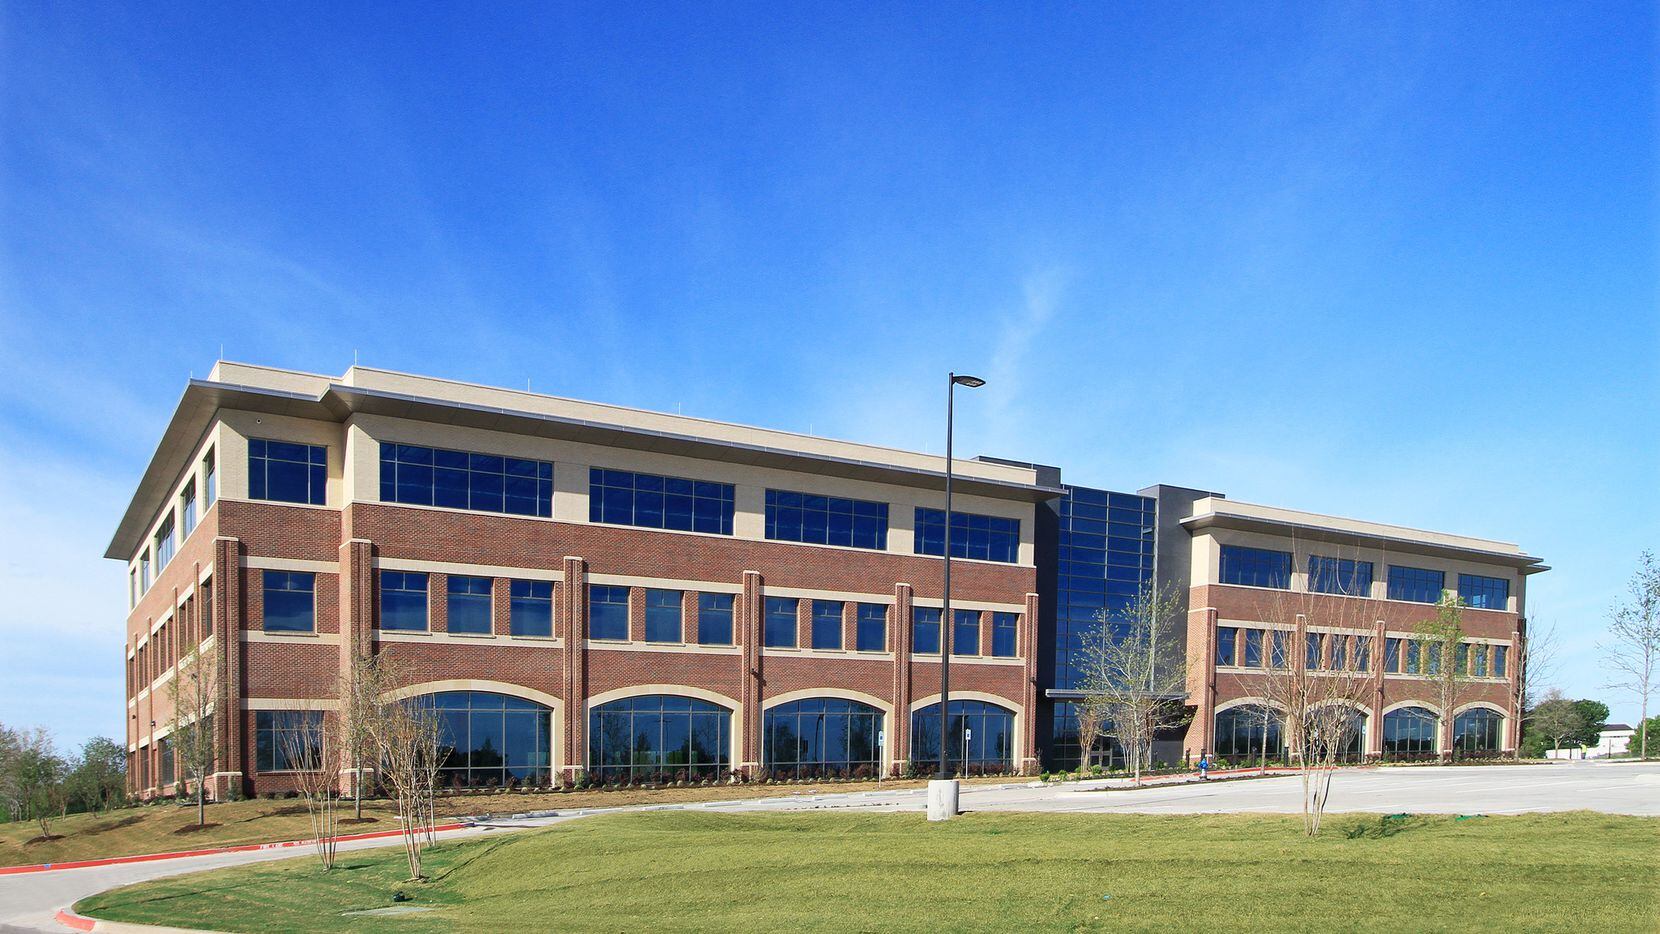 The Legacy business park building is fully leased to a health care firm.